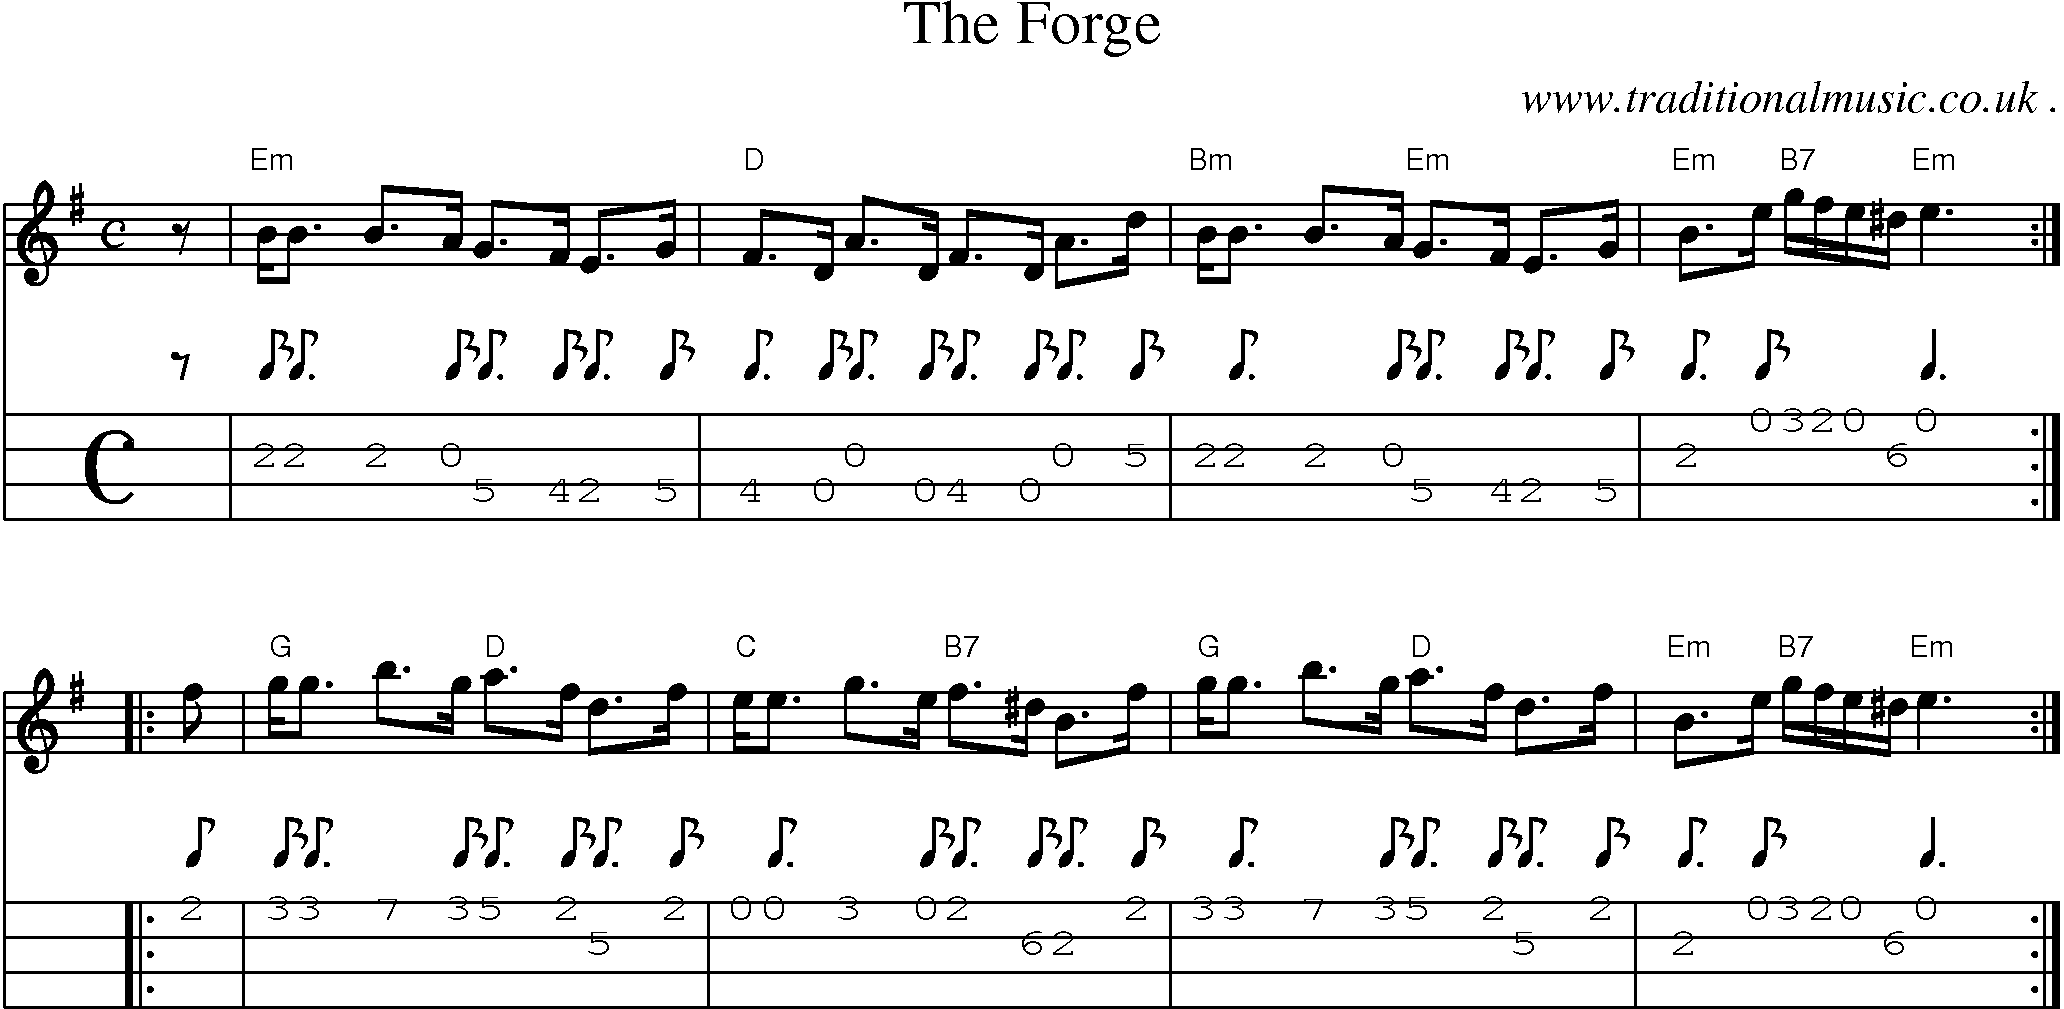 Sheet-music  score, Chords and Mandolin Tabs for The Forge